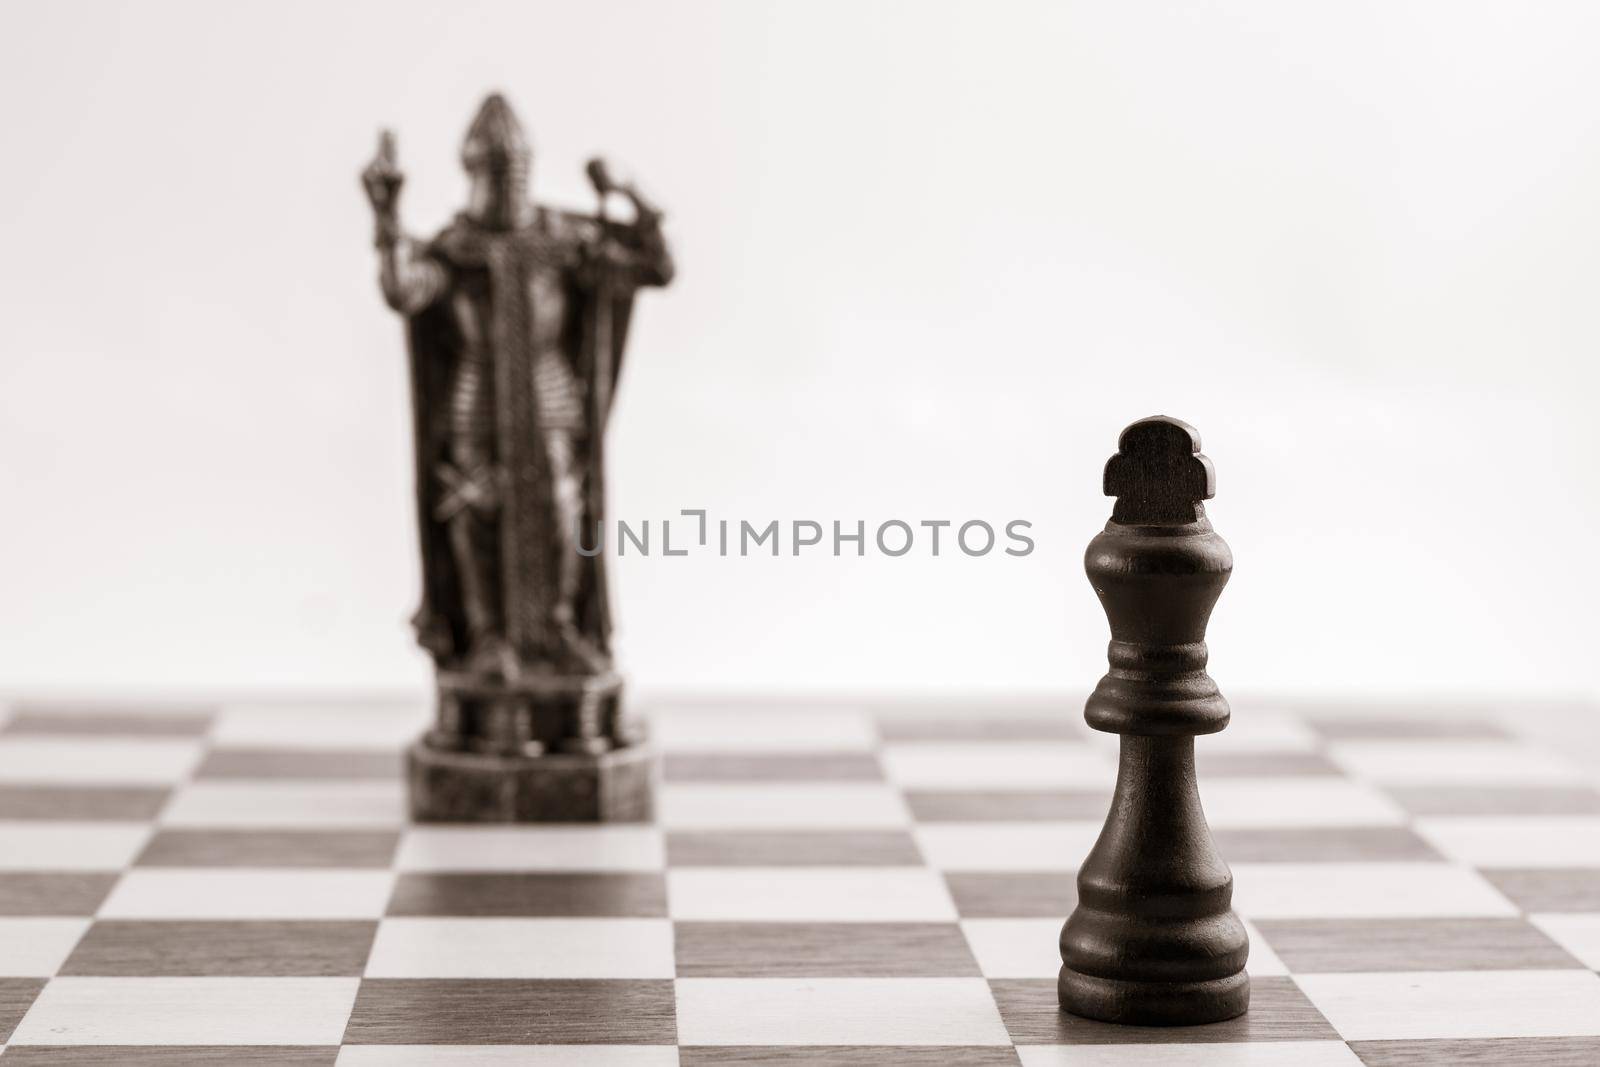 Classic black king and the same piece in the form of medieval figure on the background. Selective focus on classic piece